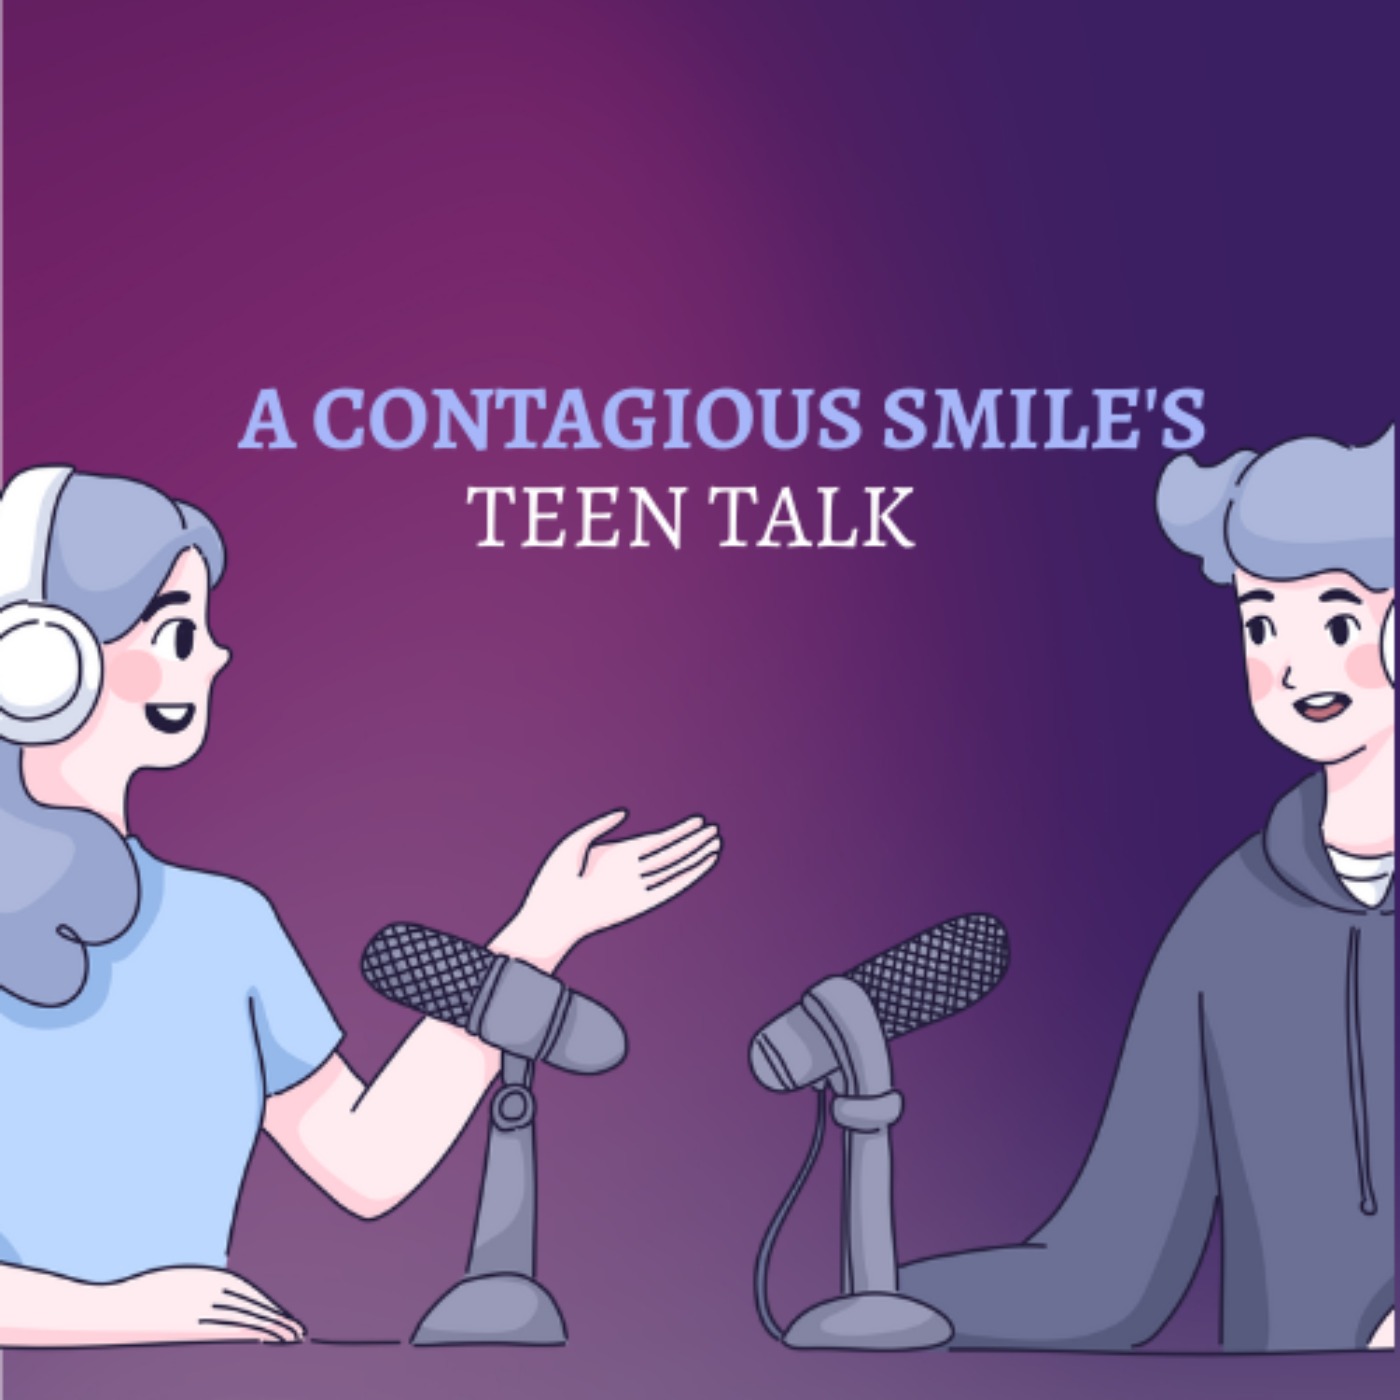 A Contagious Smile brings you another episode of Teen Talk "What it is like being a teen in today's times."